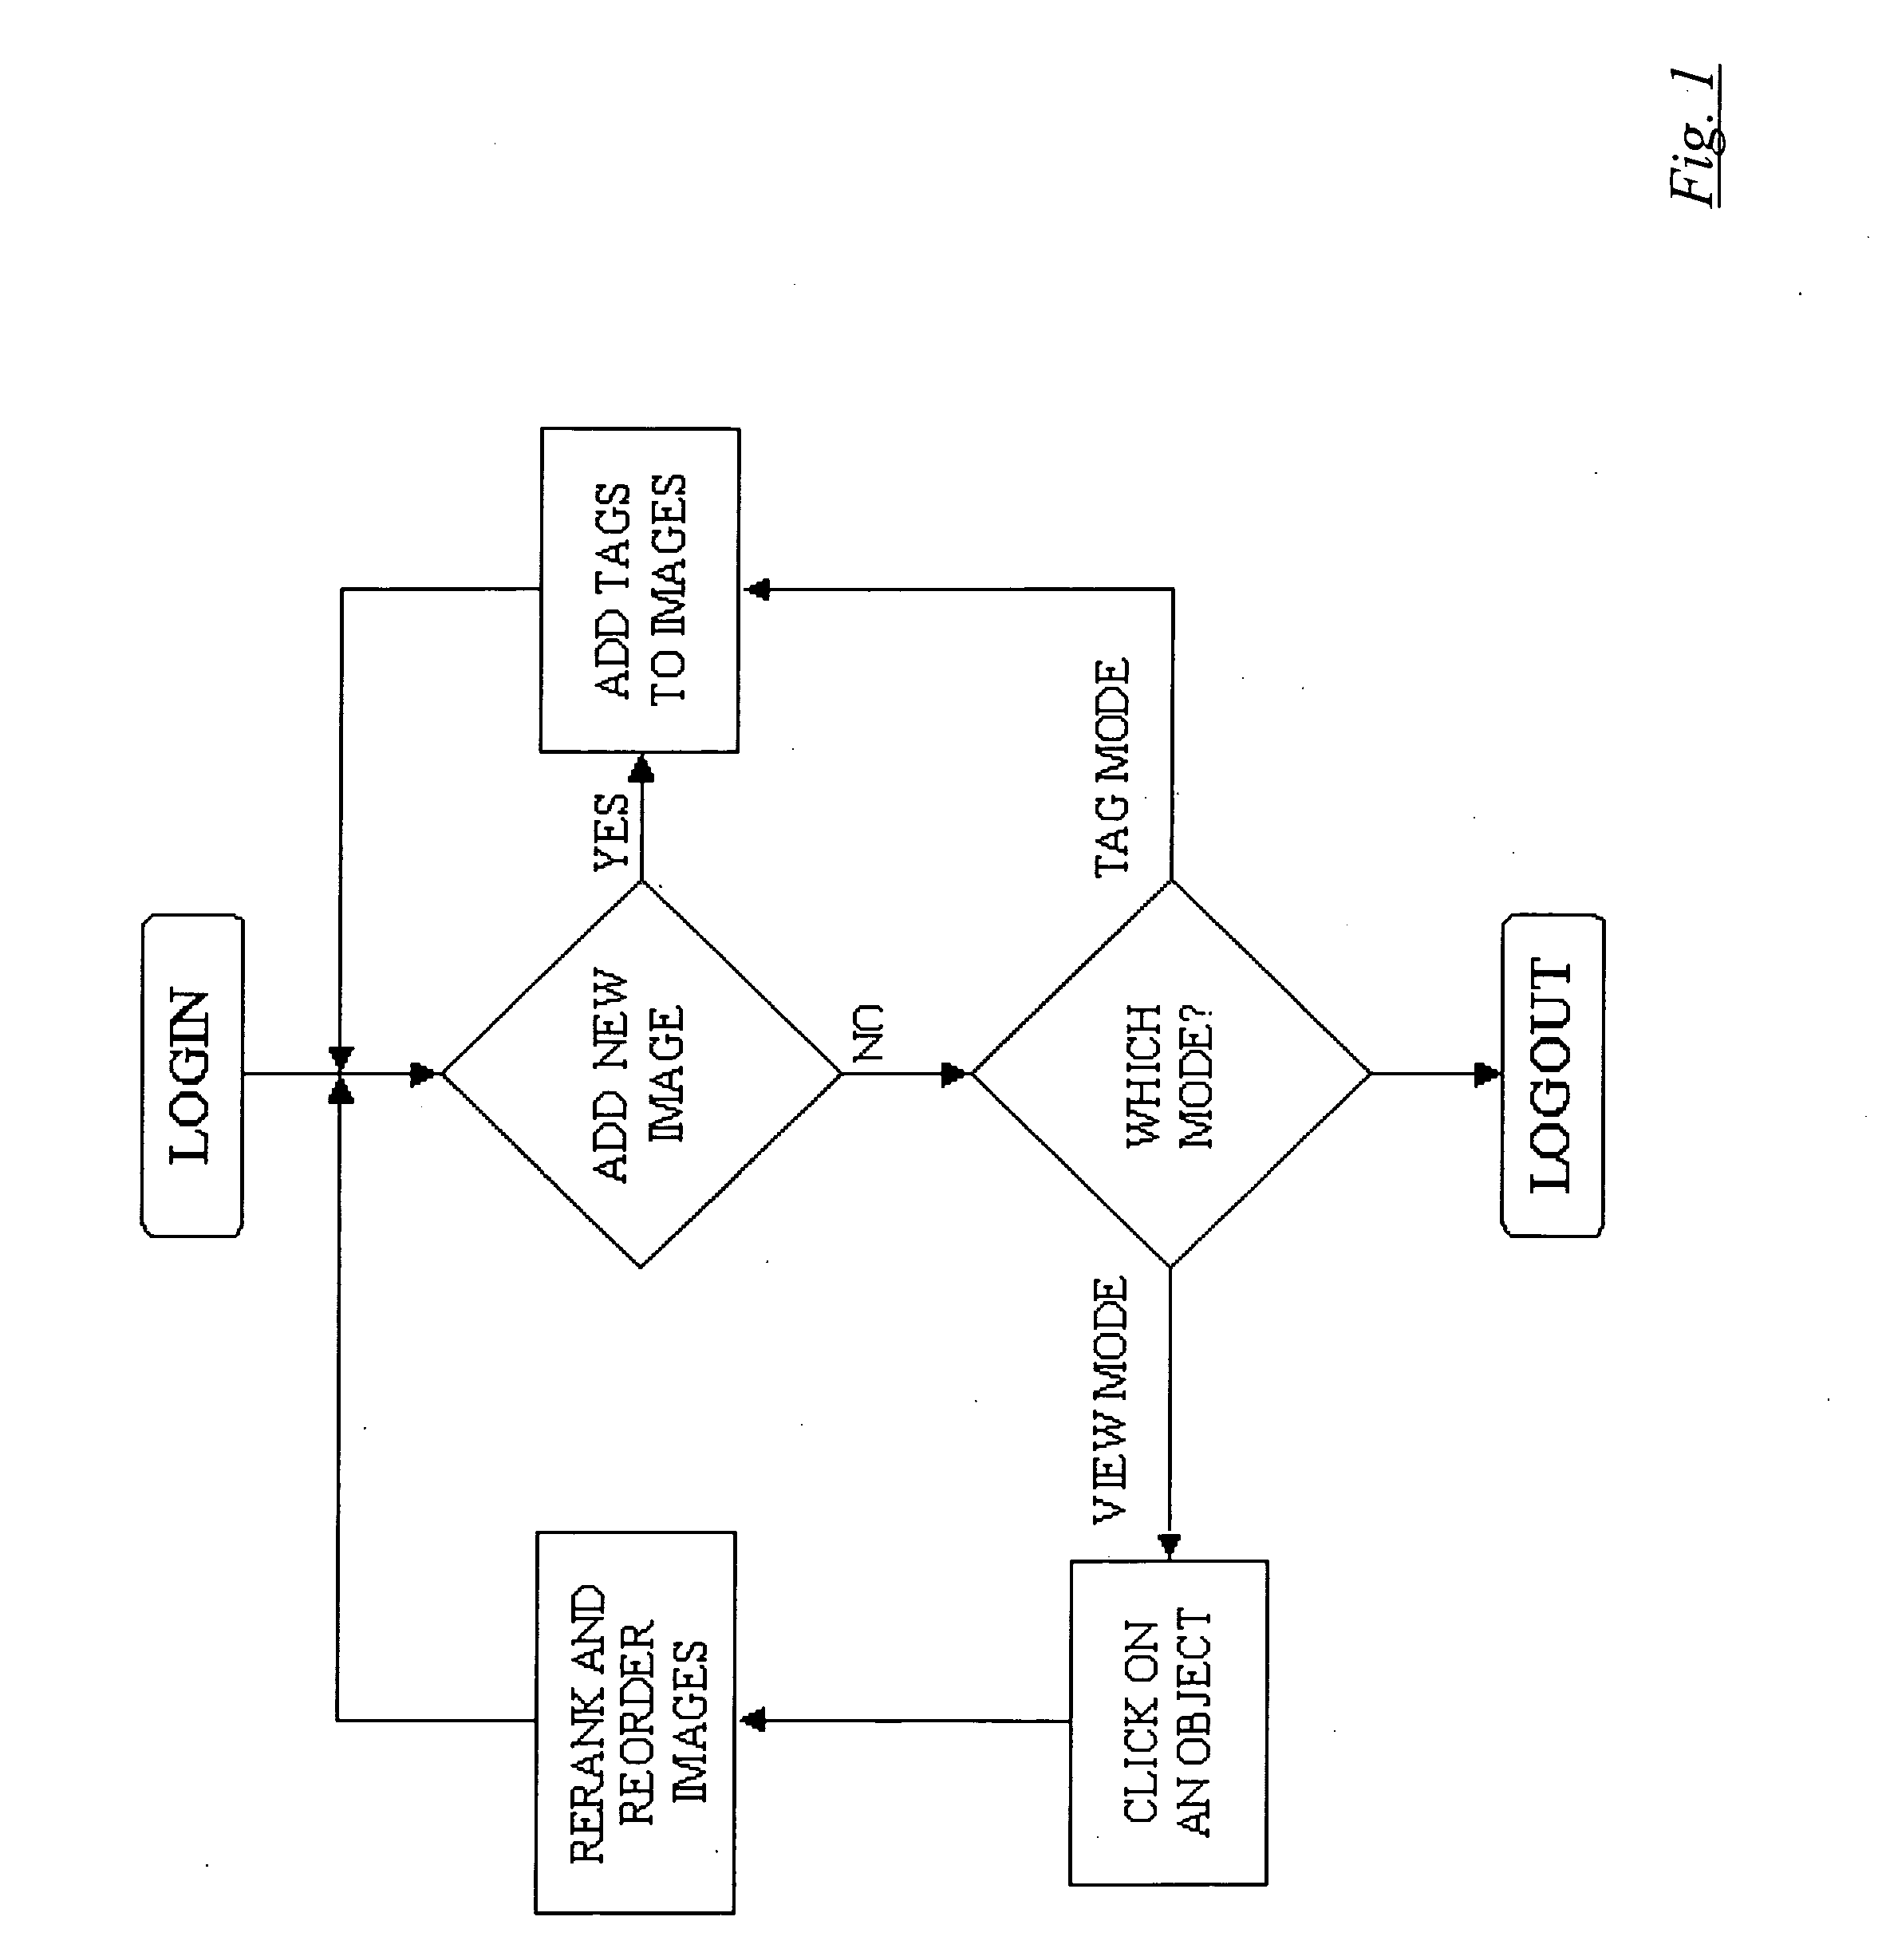 Method, system and computer program for interactive spatial link-based image searching, sorting and/or displaying